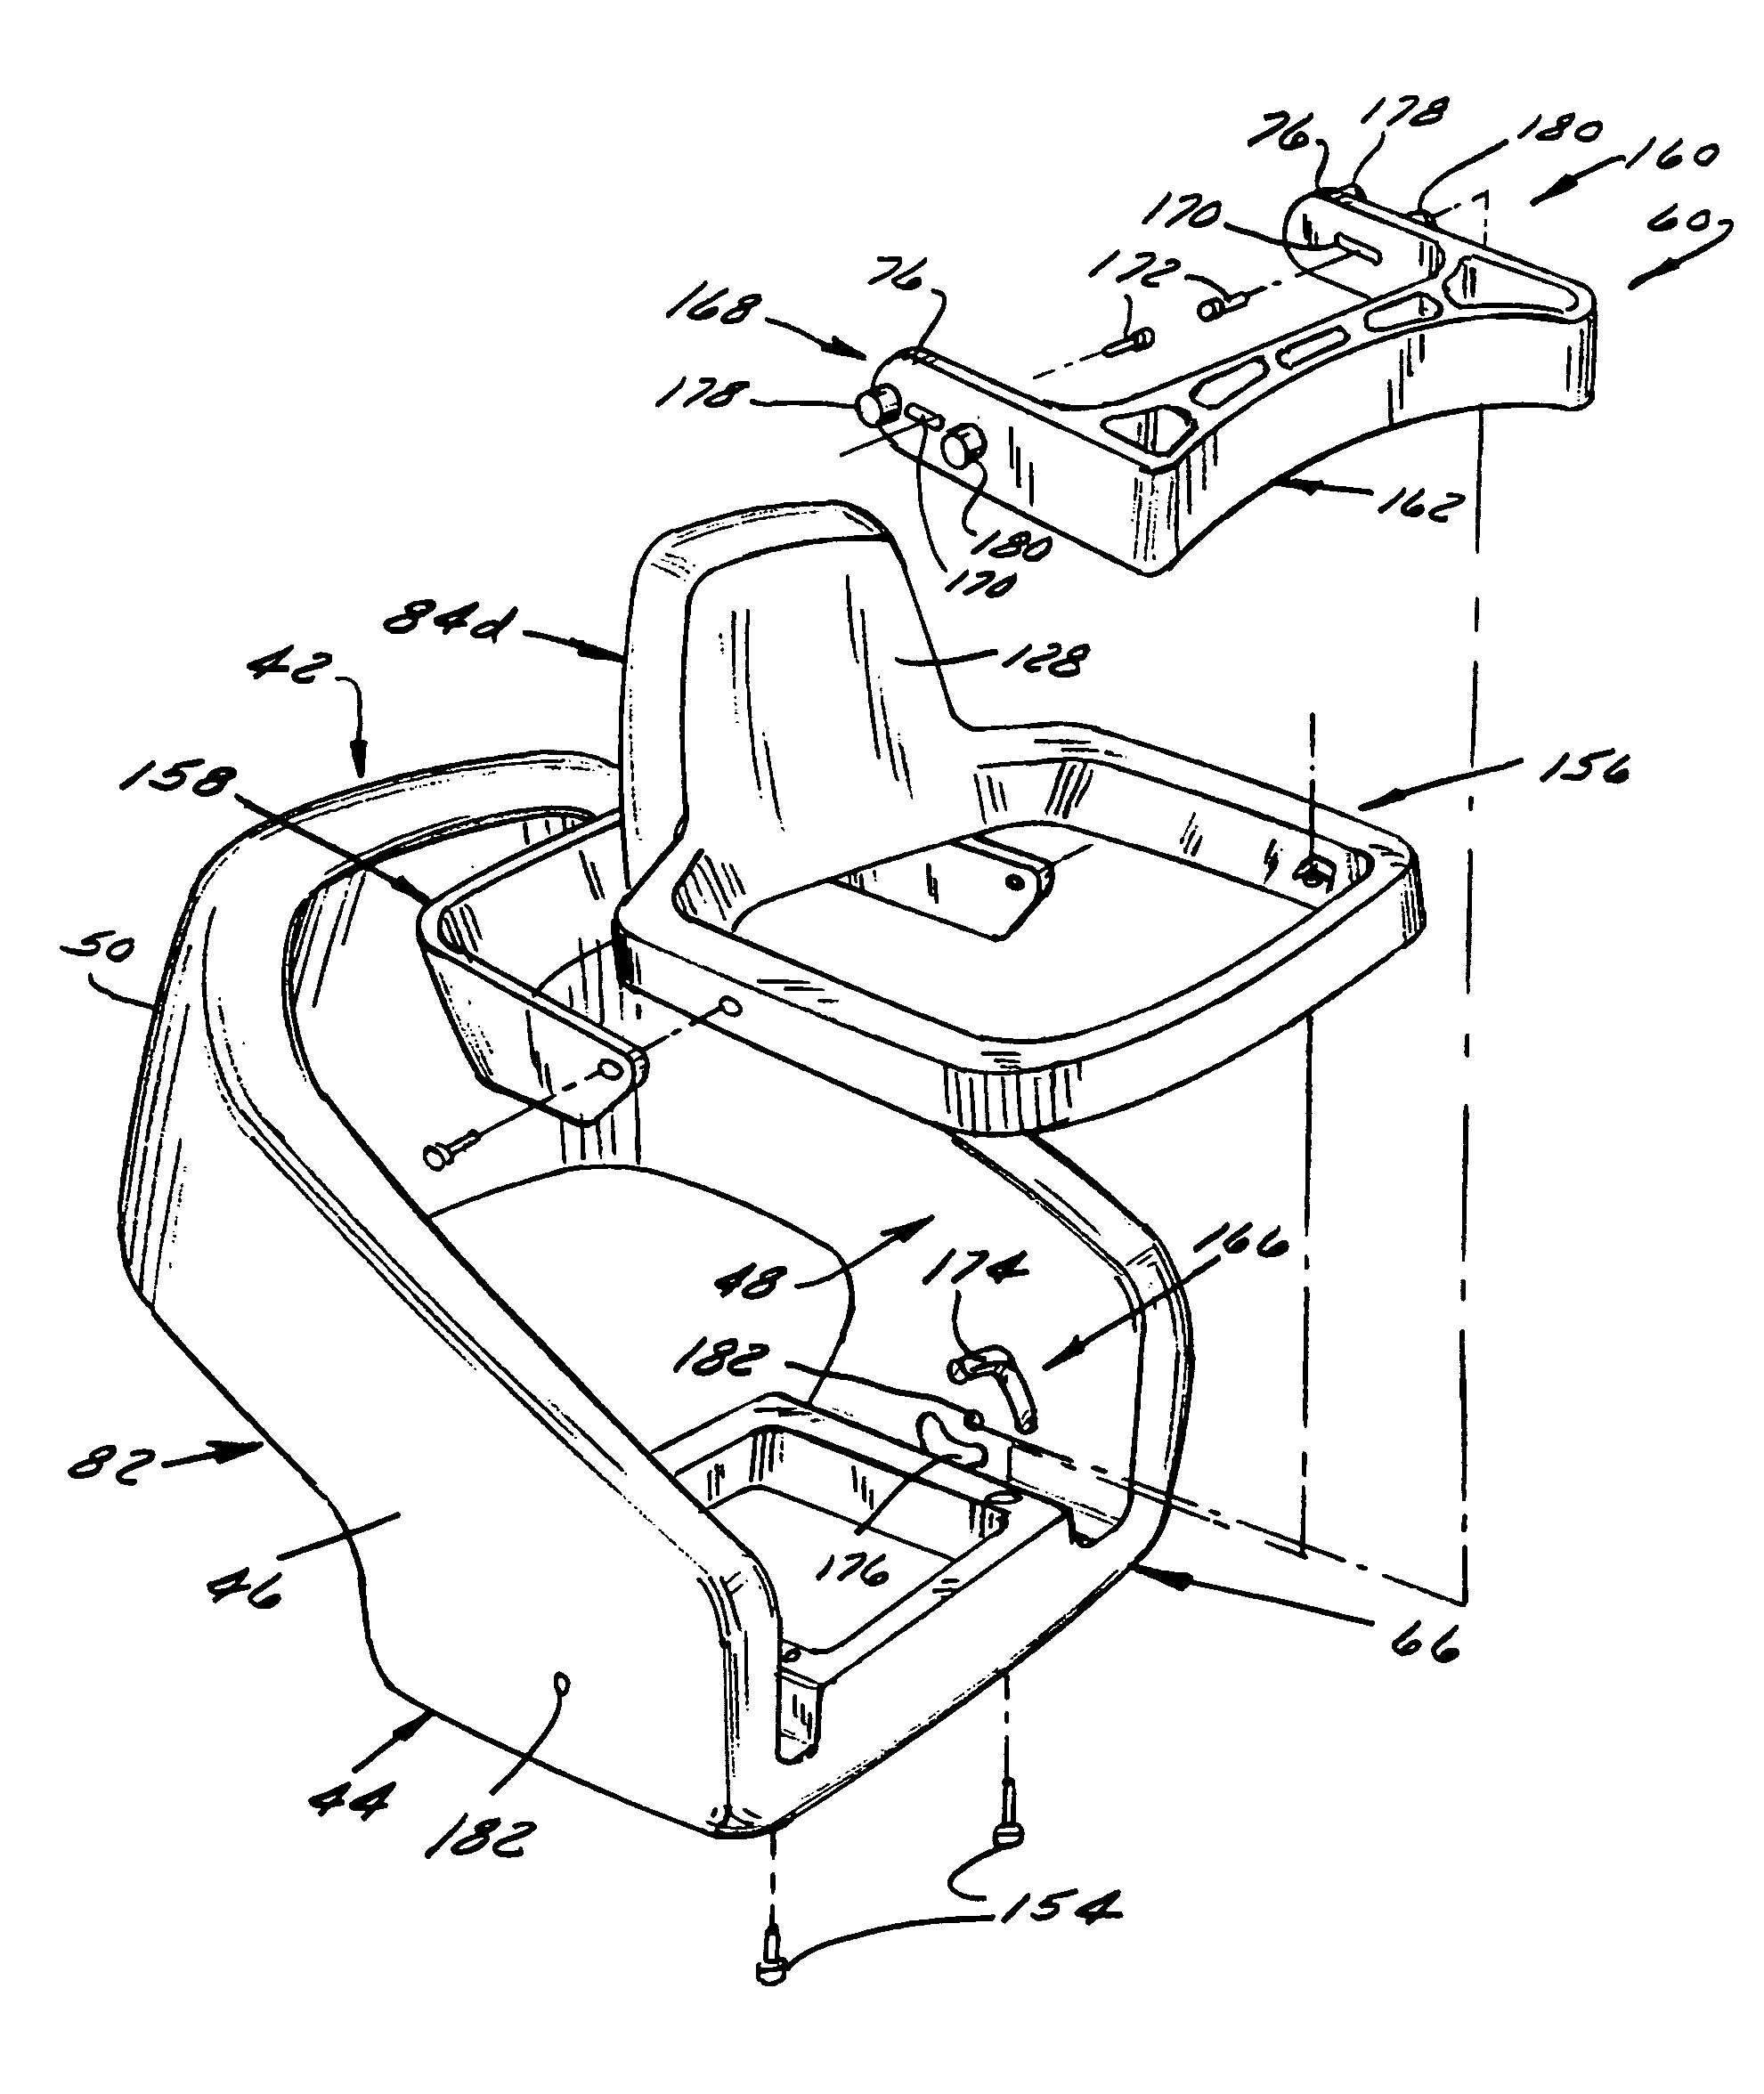 Seat, suspension, bolster and shell